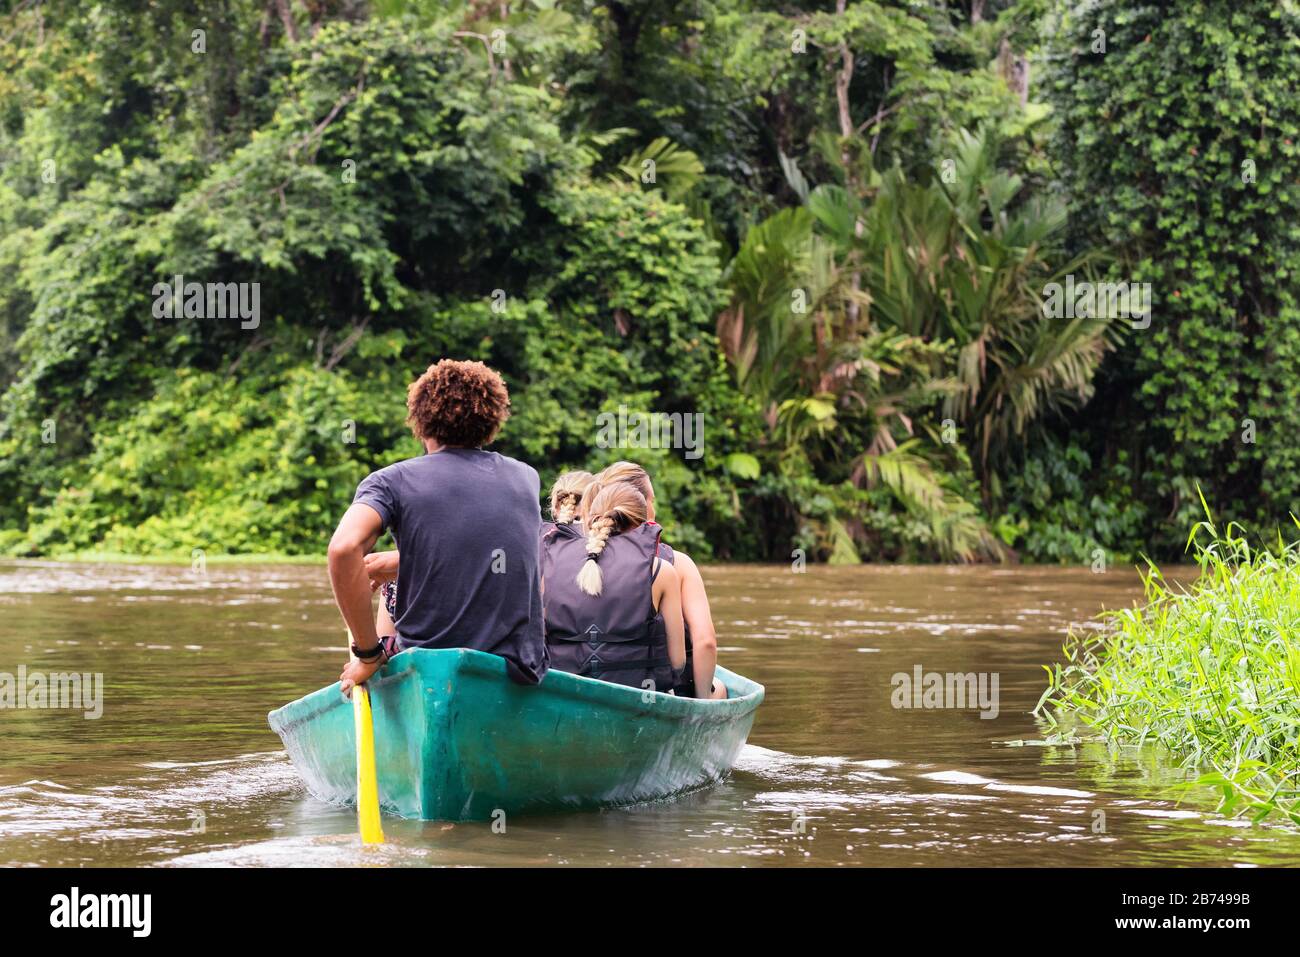 People exploring a wild nature area by rowing boat. Ecotourism concept. Tortuguero national park. Costa Rica. Stock Photo